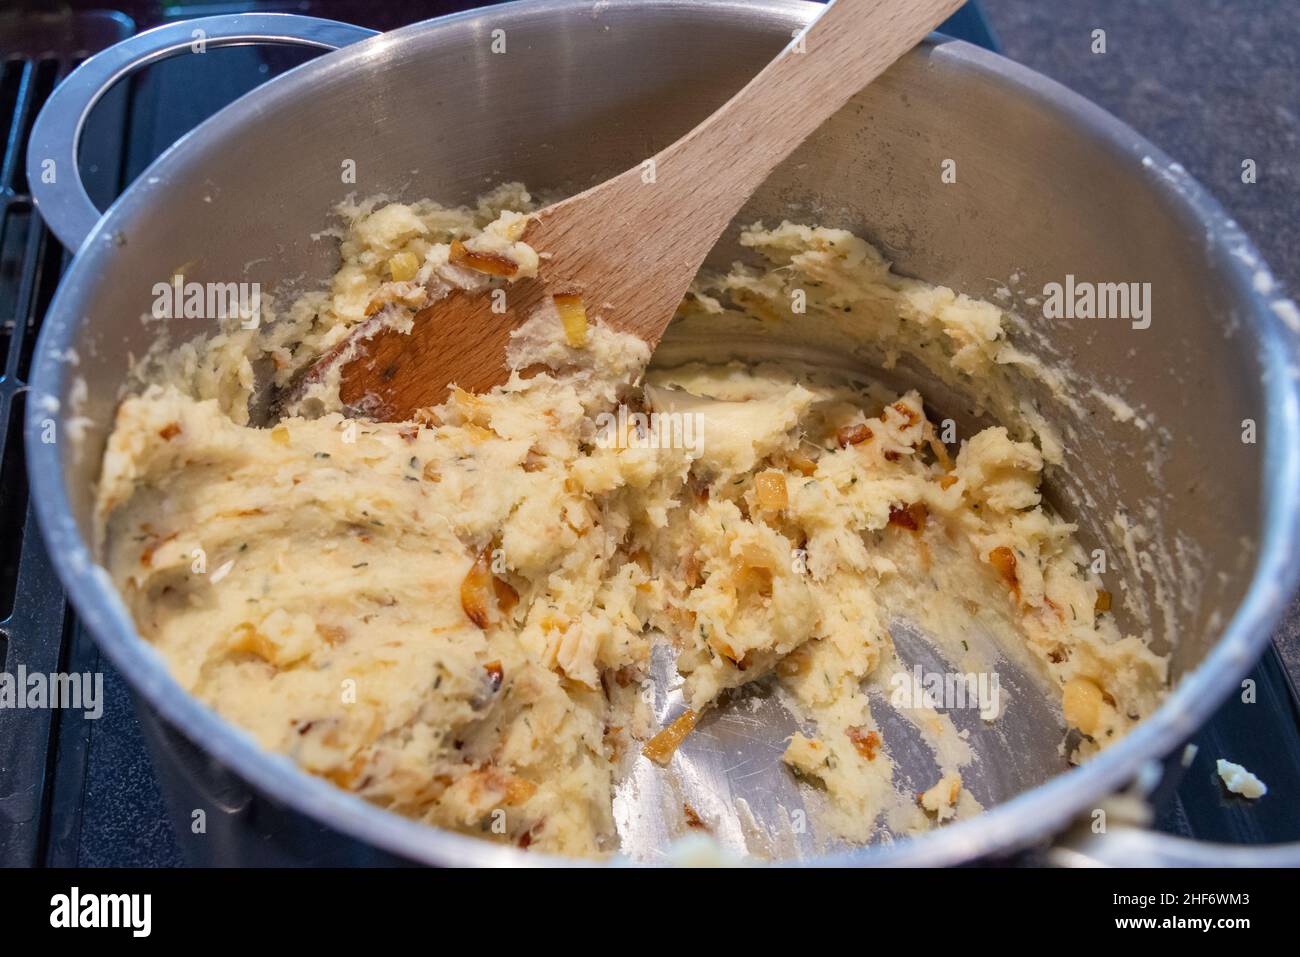 A pot of uncooked salt cod fishcakes is prepared for frying. The mixture of savory, potato, salt codfish, and butter is shaped into small patties. Stock Photo